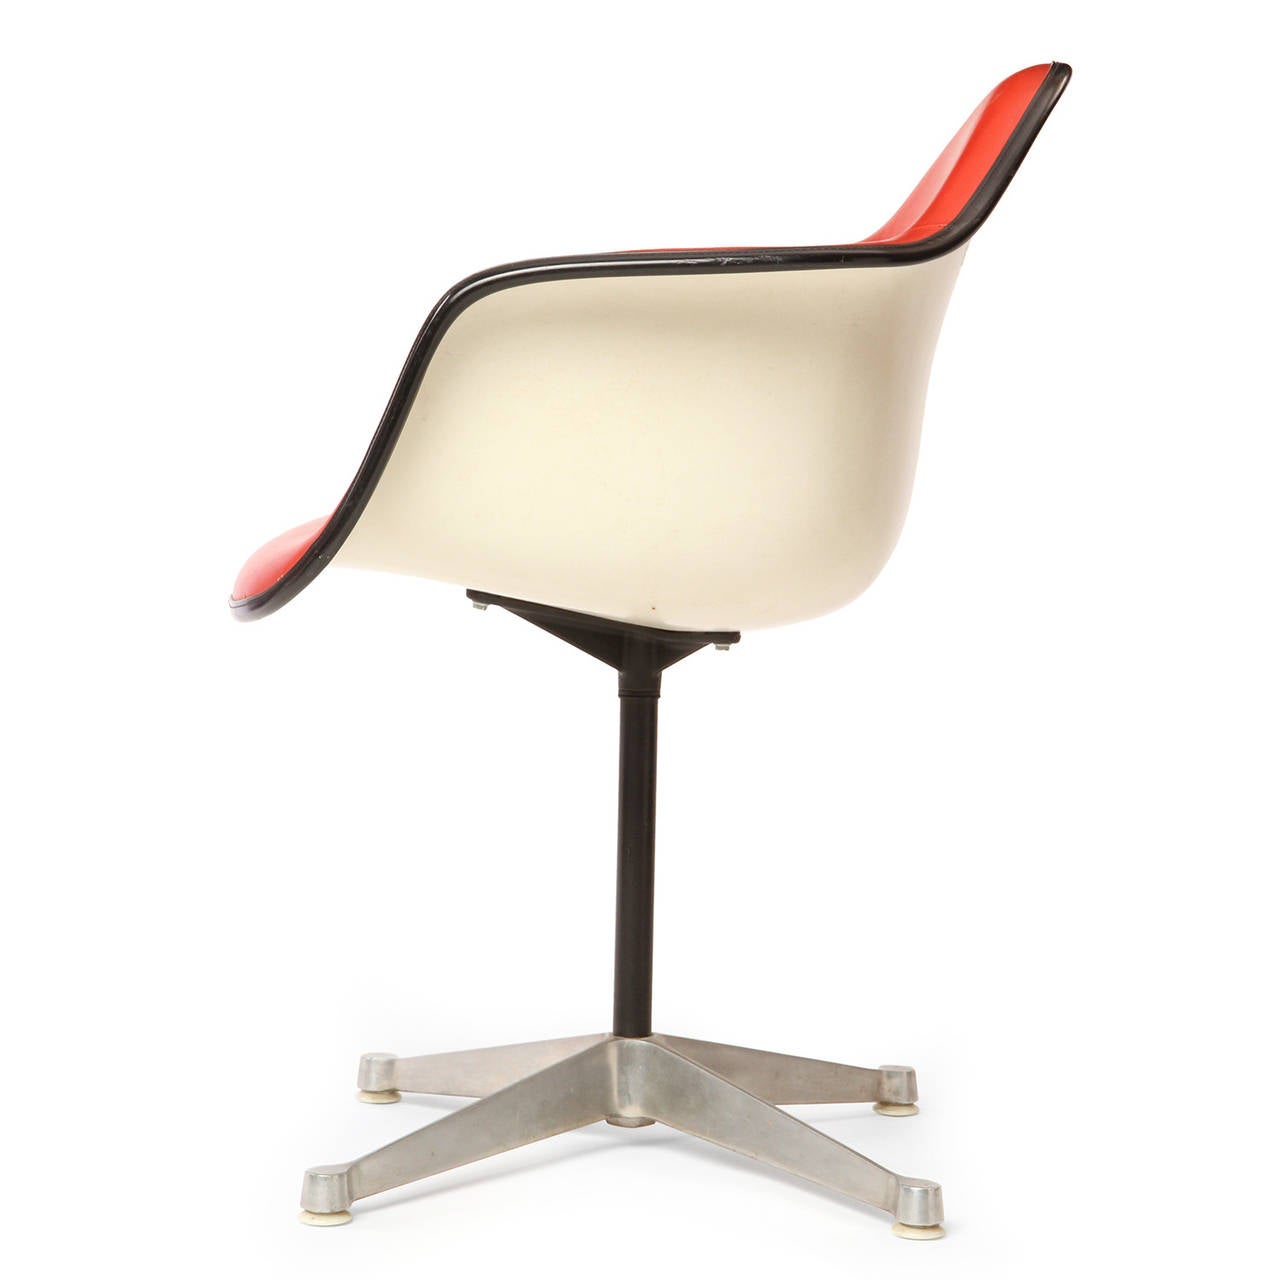 Molded Swiveling Chairs by Charles and Ray Eames In Good Condition For Sale In Sagaponack, NY